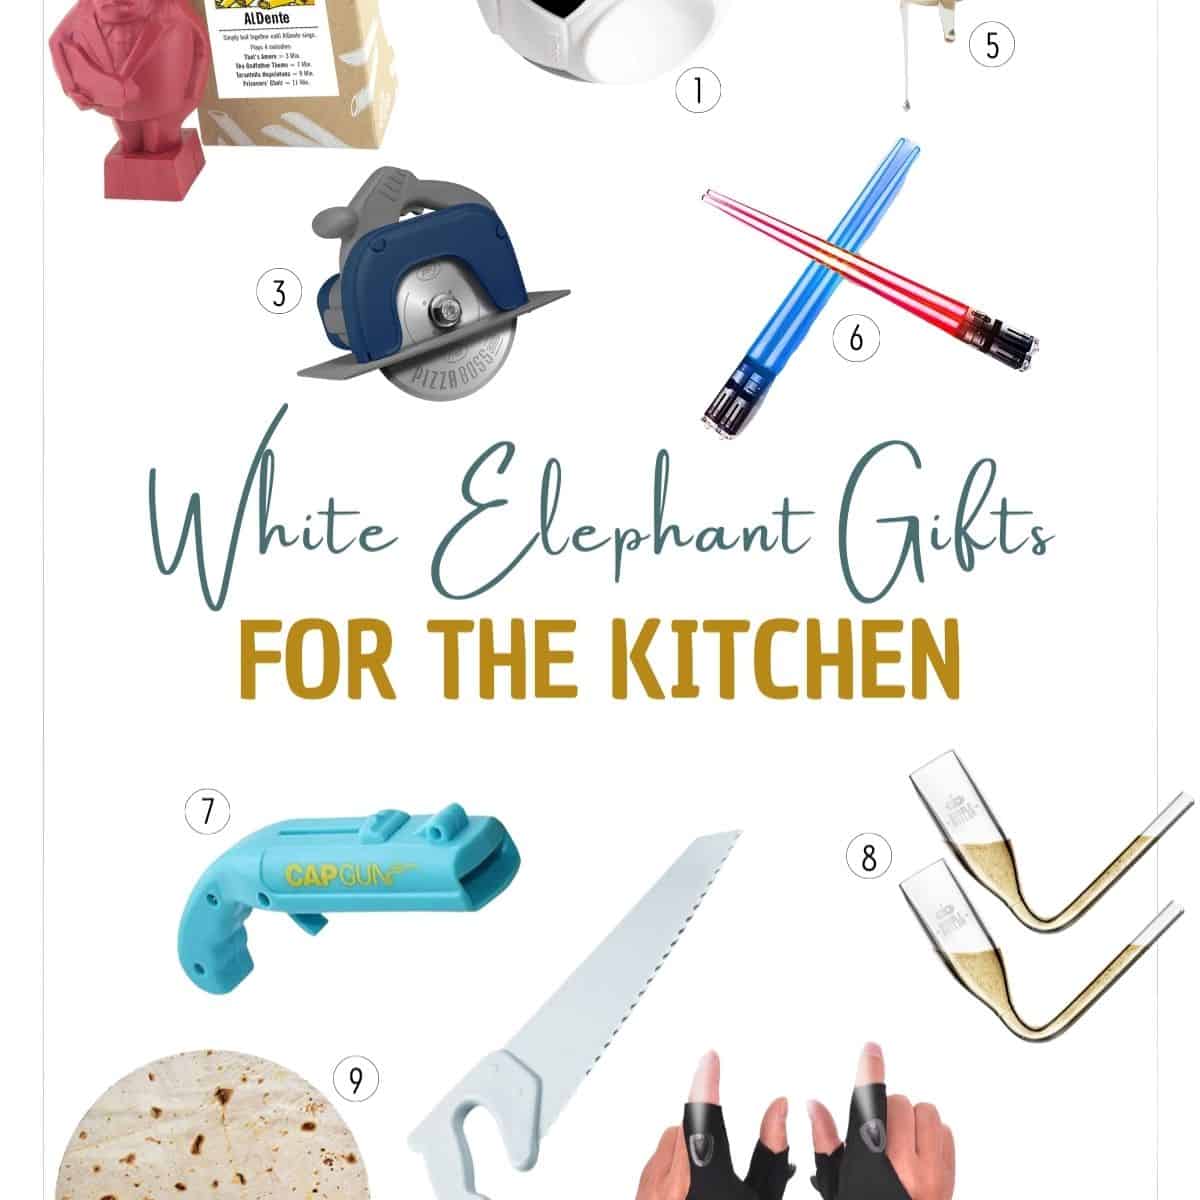 Weird Kitchen Gadgets & Tools - Unique Gift Ideas for Foodies